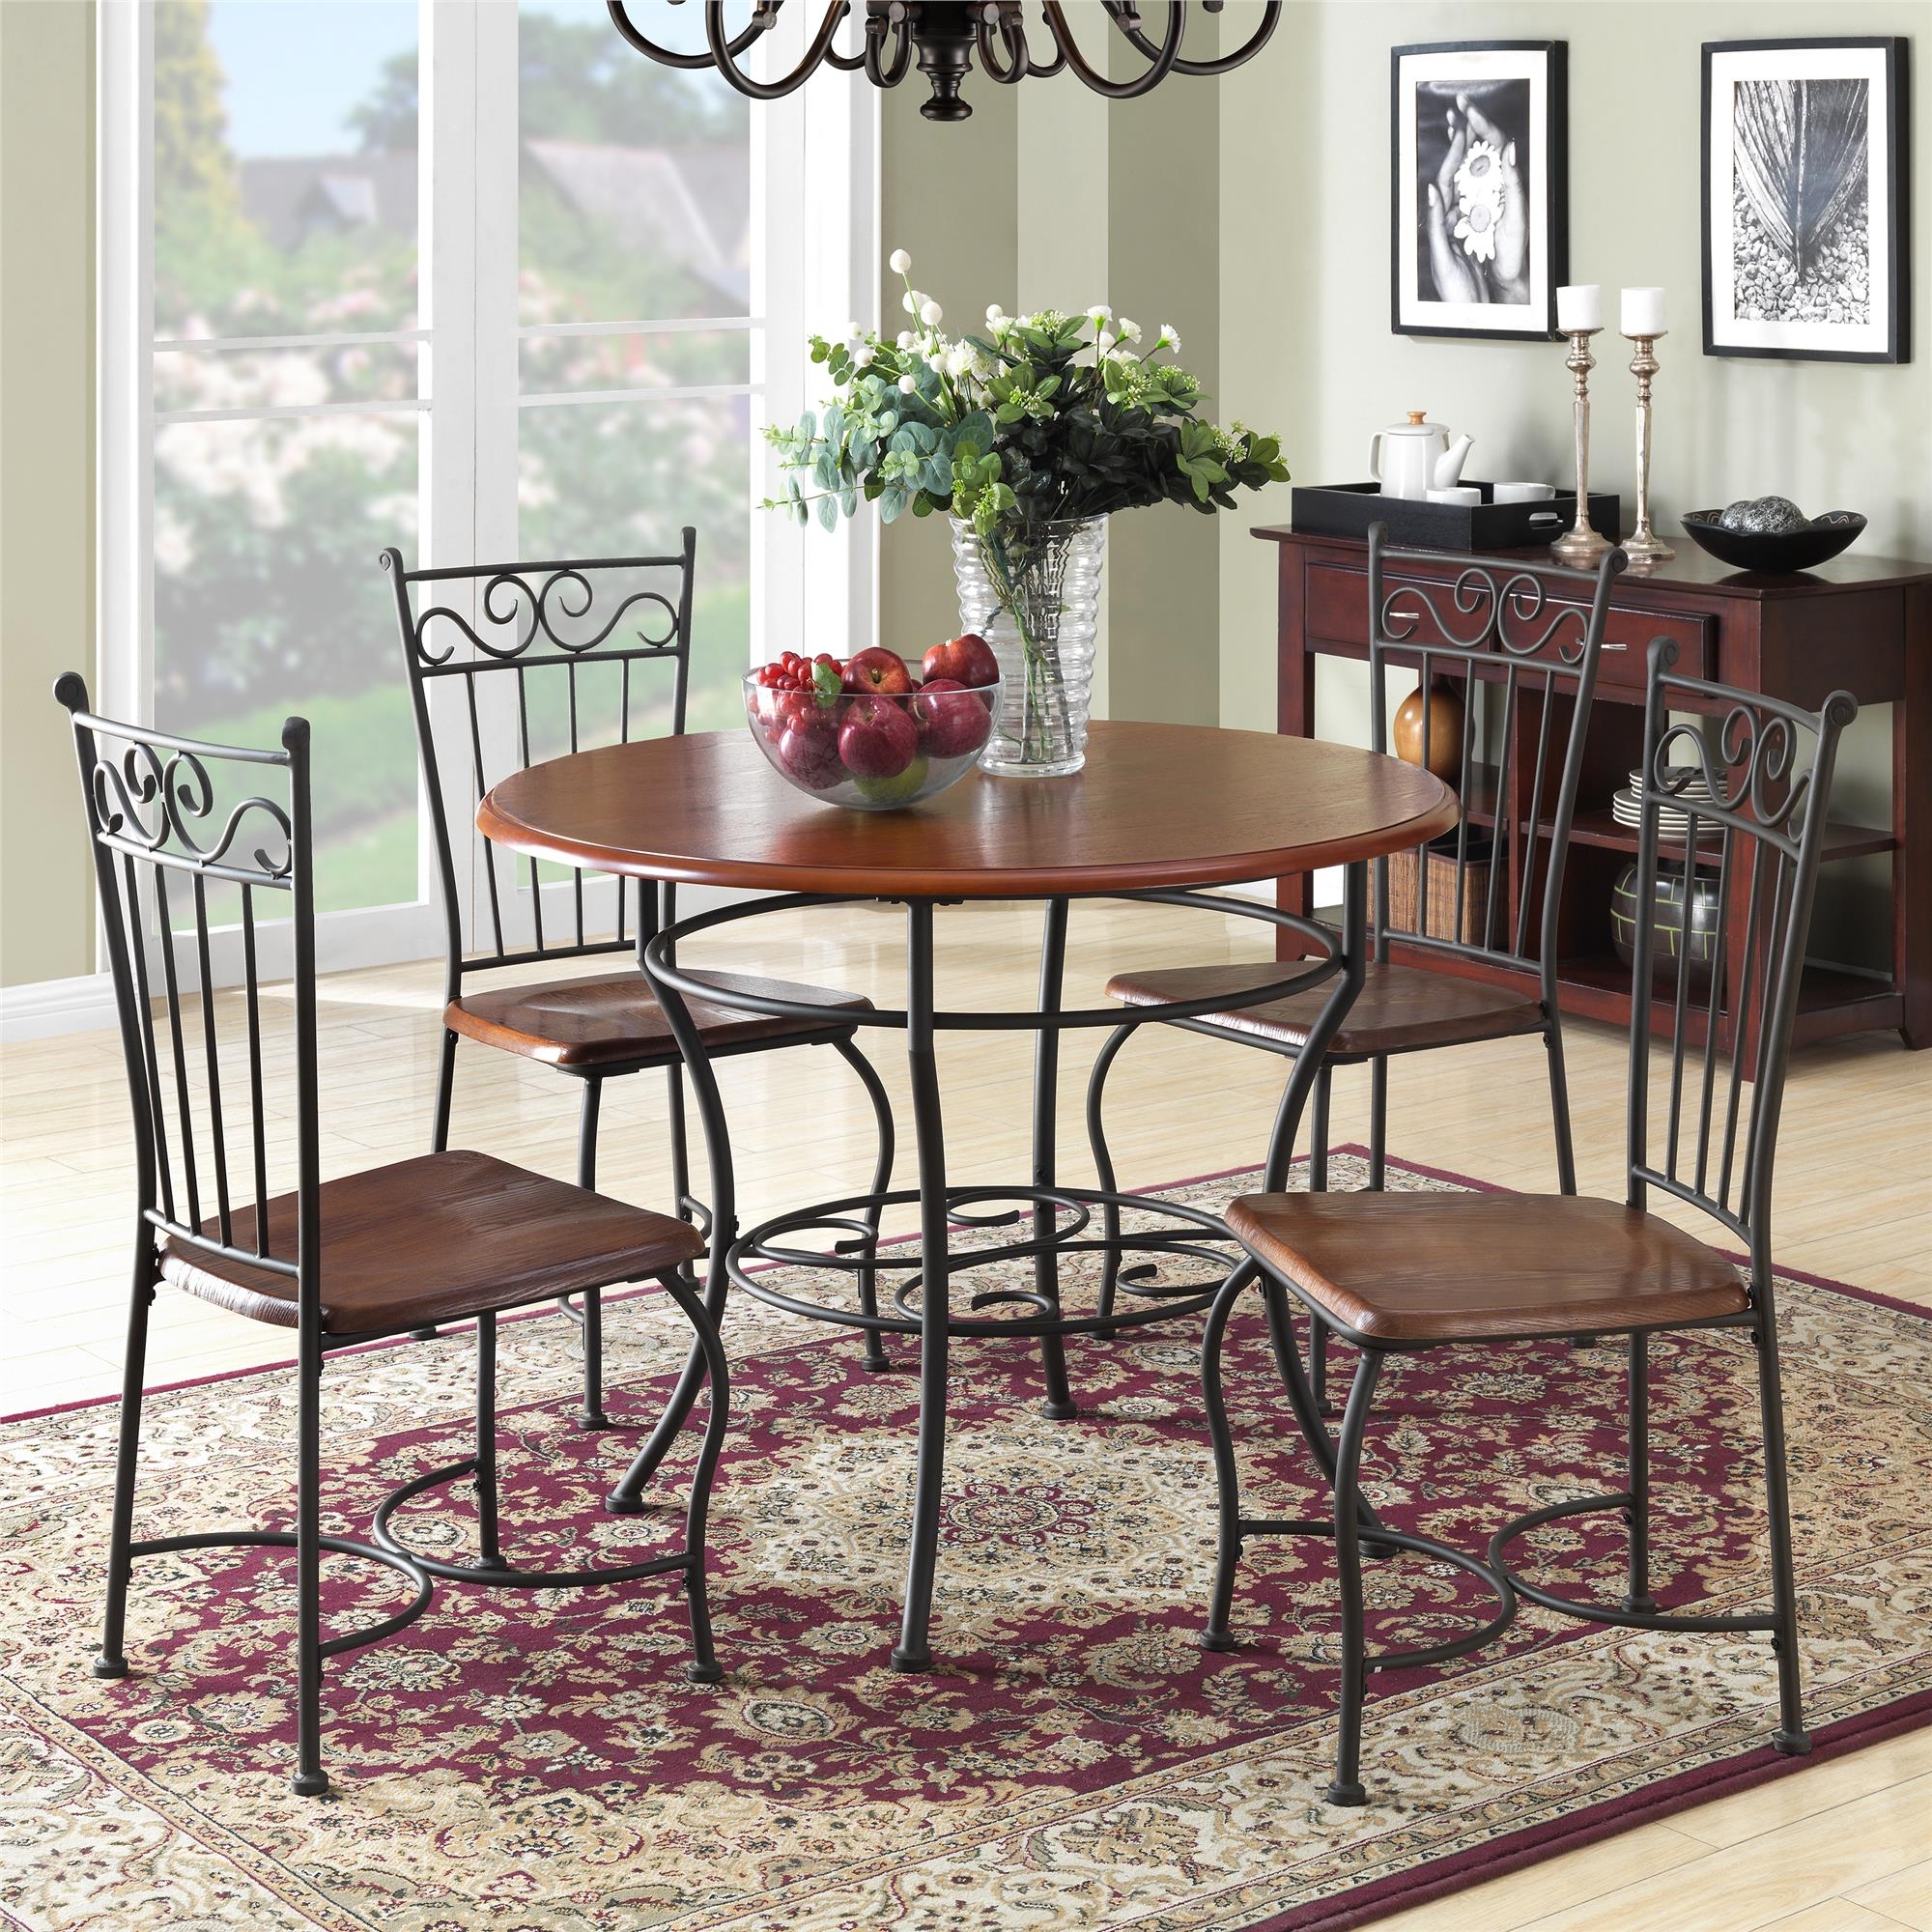 Small Round Dinette Sets - Ideas on Foter